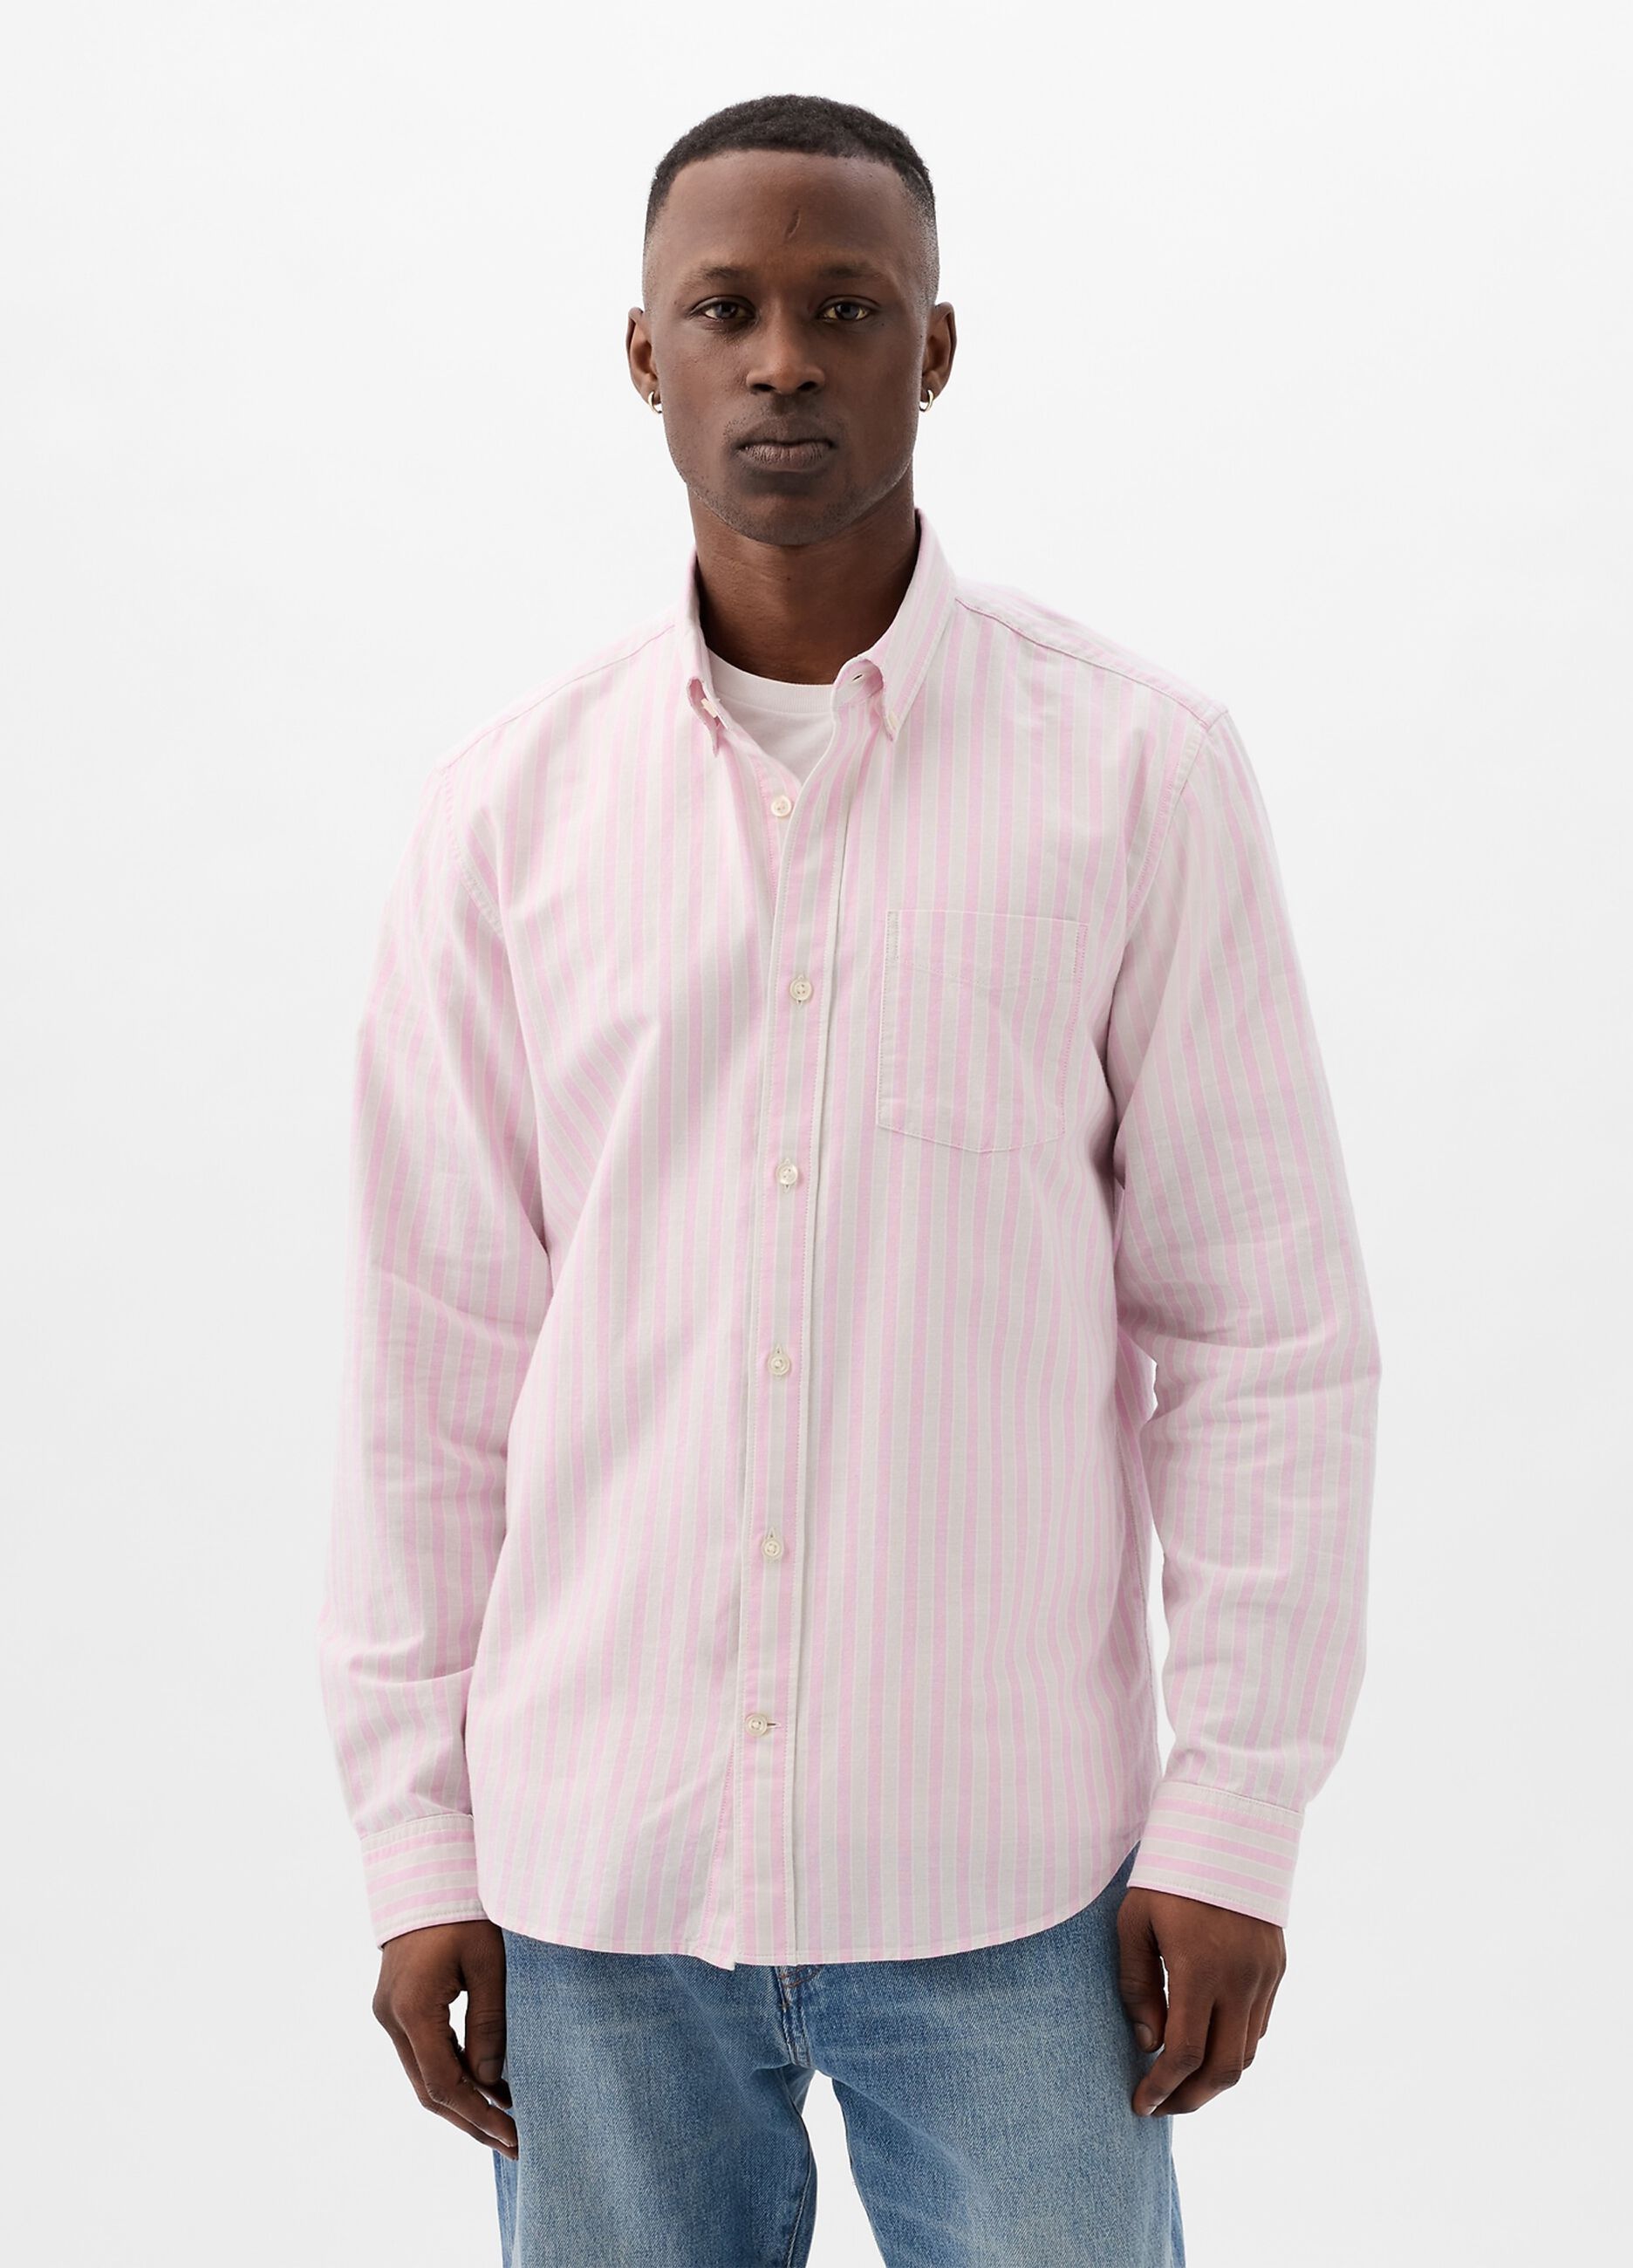 Regular-fit shirt in striped Oxford cotton